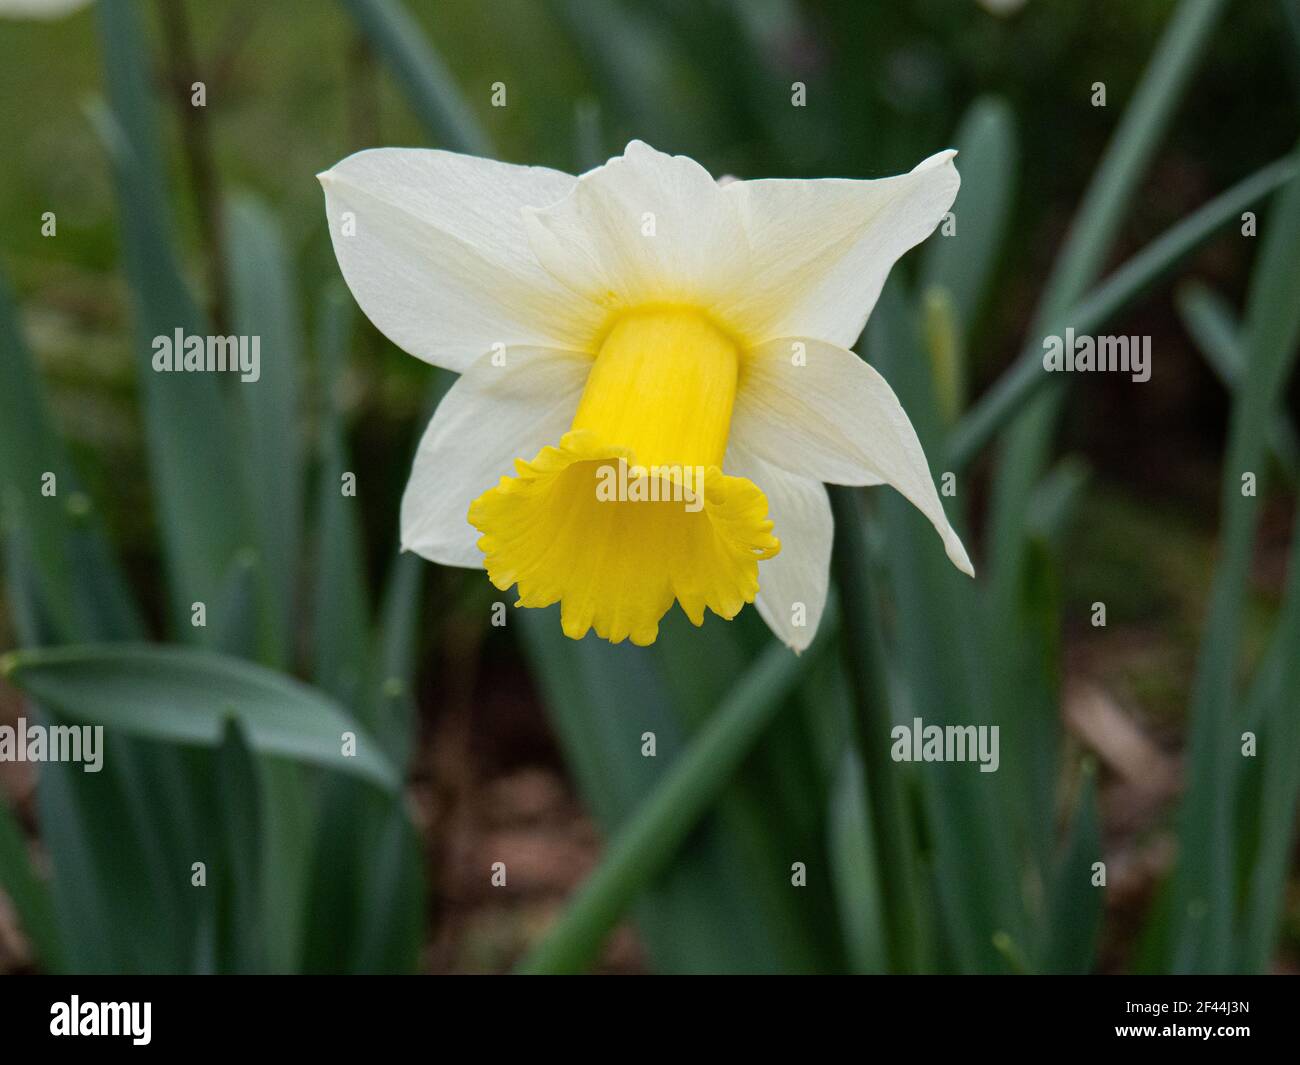 A close up of a single pale yellow and white flower of the early daffodil Narcissus Spring Dawn Stock Photo